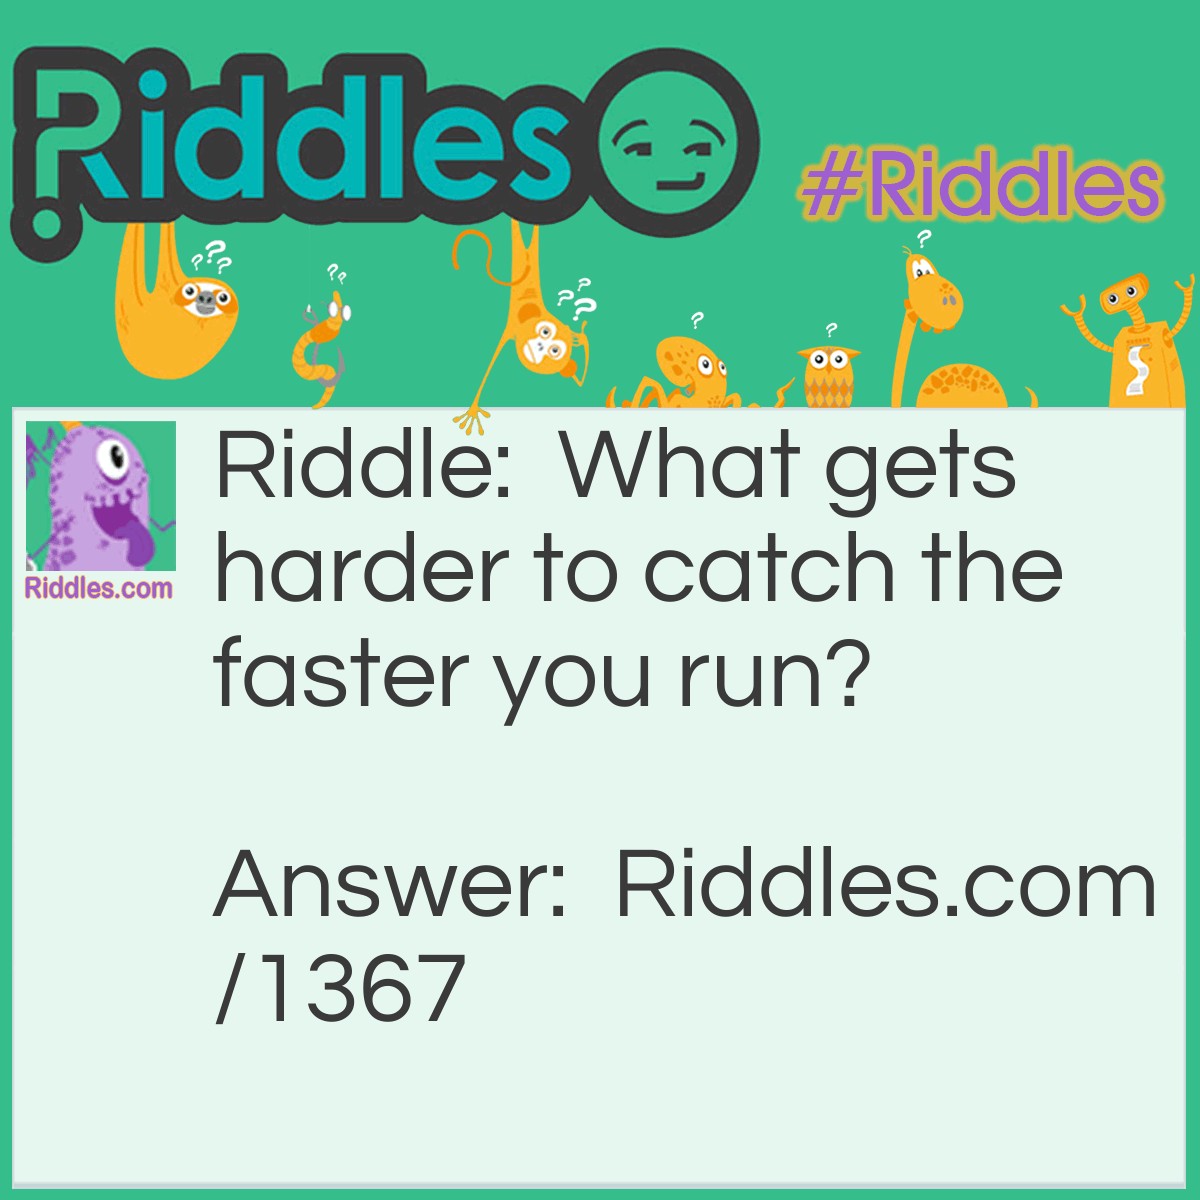 Riddle: What gets harder to catch the faster you run? Answer: Your breath